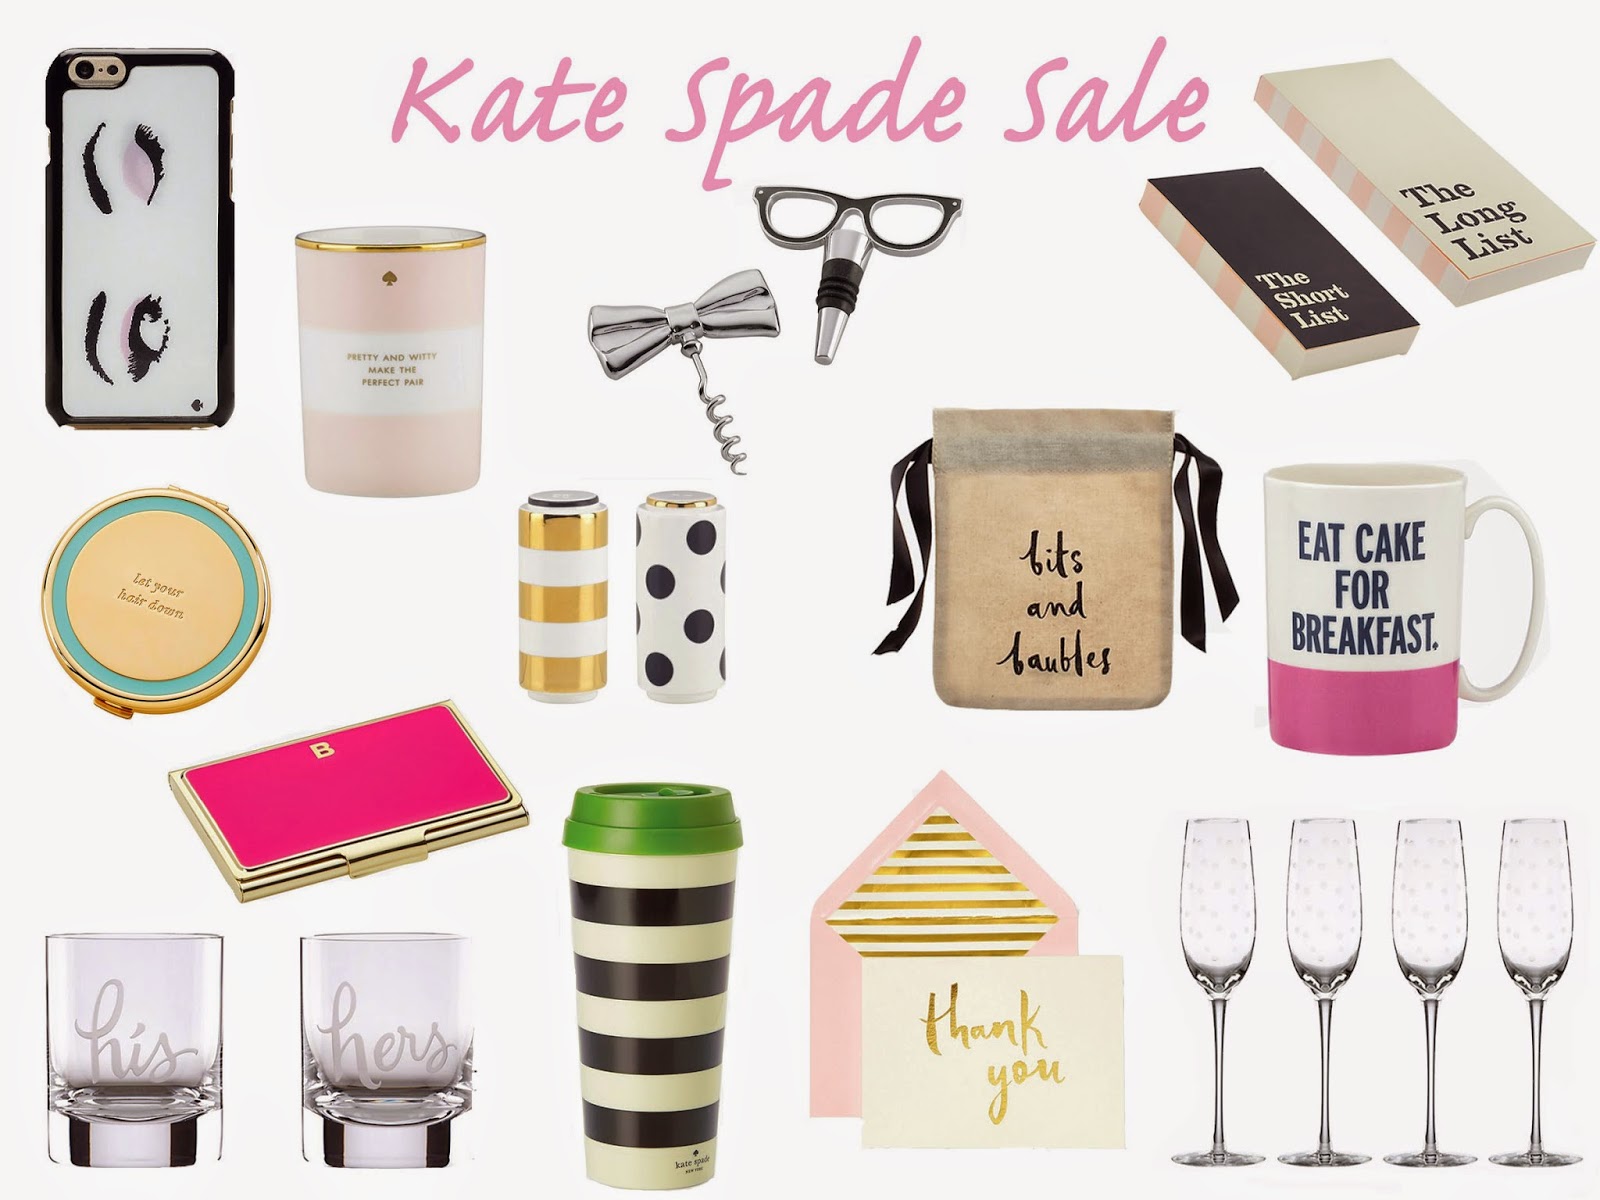 KATE SPADE SALE - Styled Snapshots